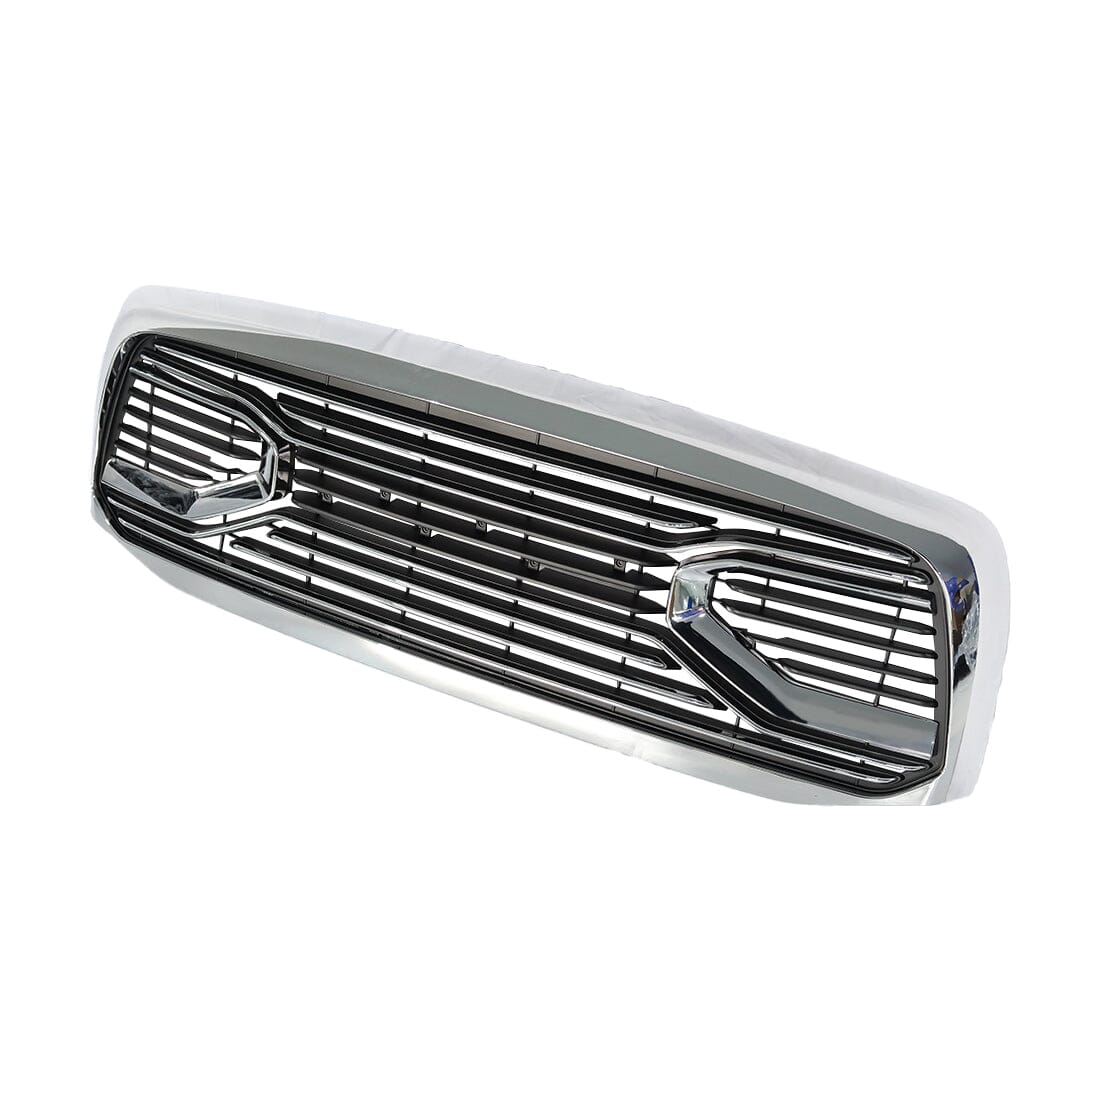 Chrome Big Horn Style Front Grille W/Amber For 2006-2008 Dodge Ram 1500| Amoffroad